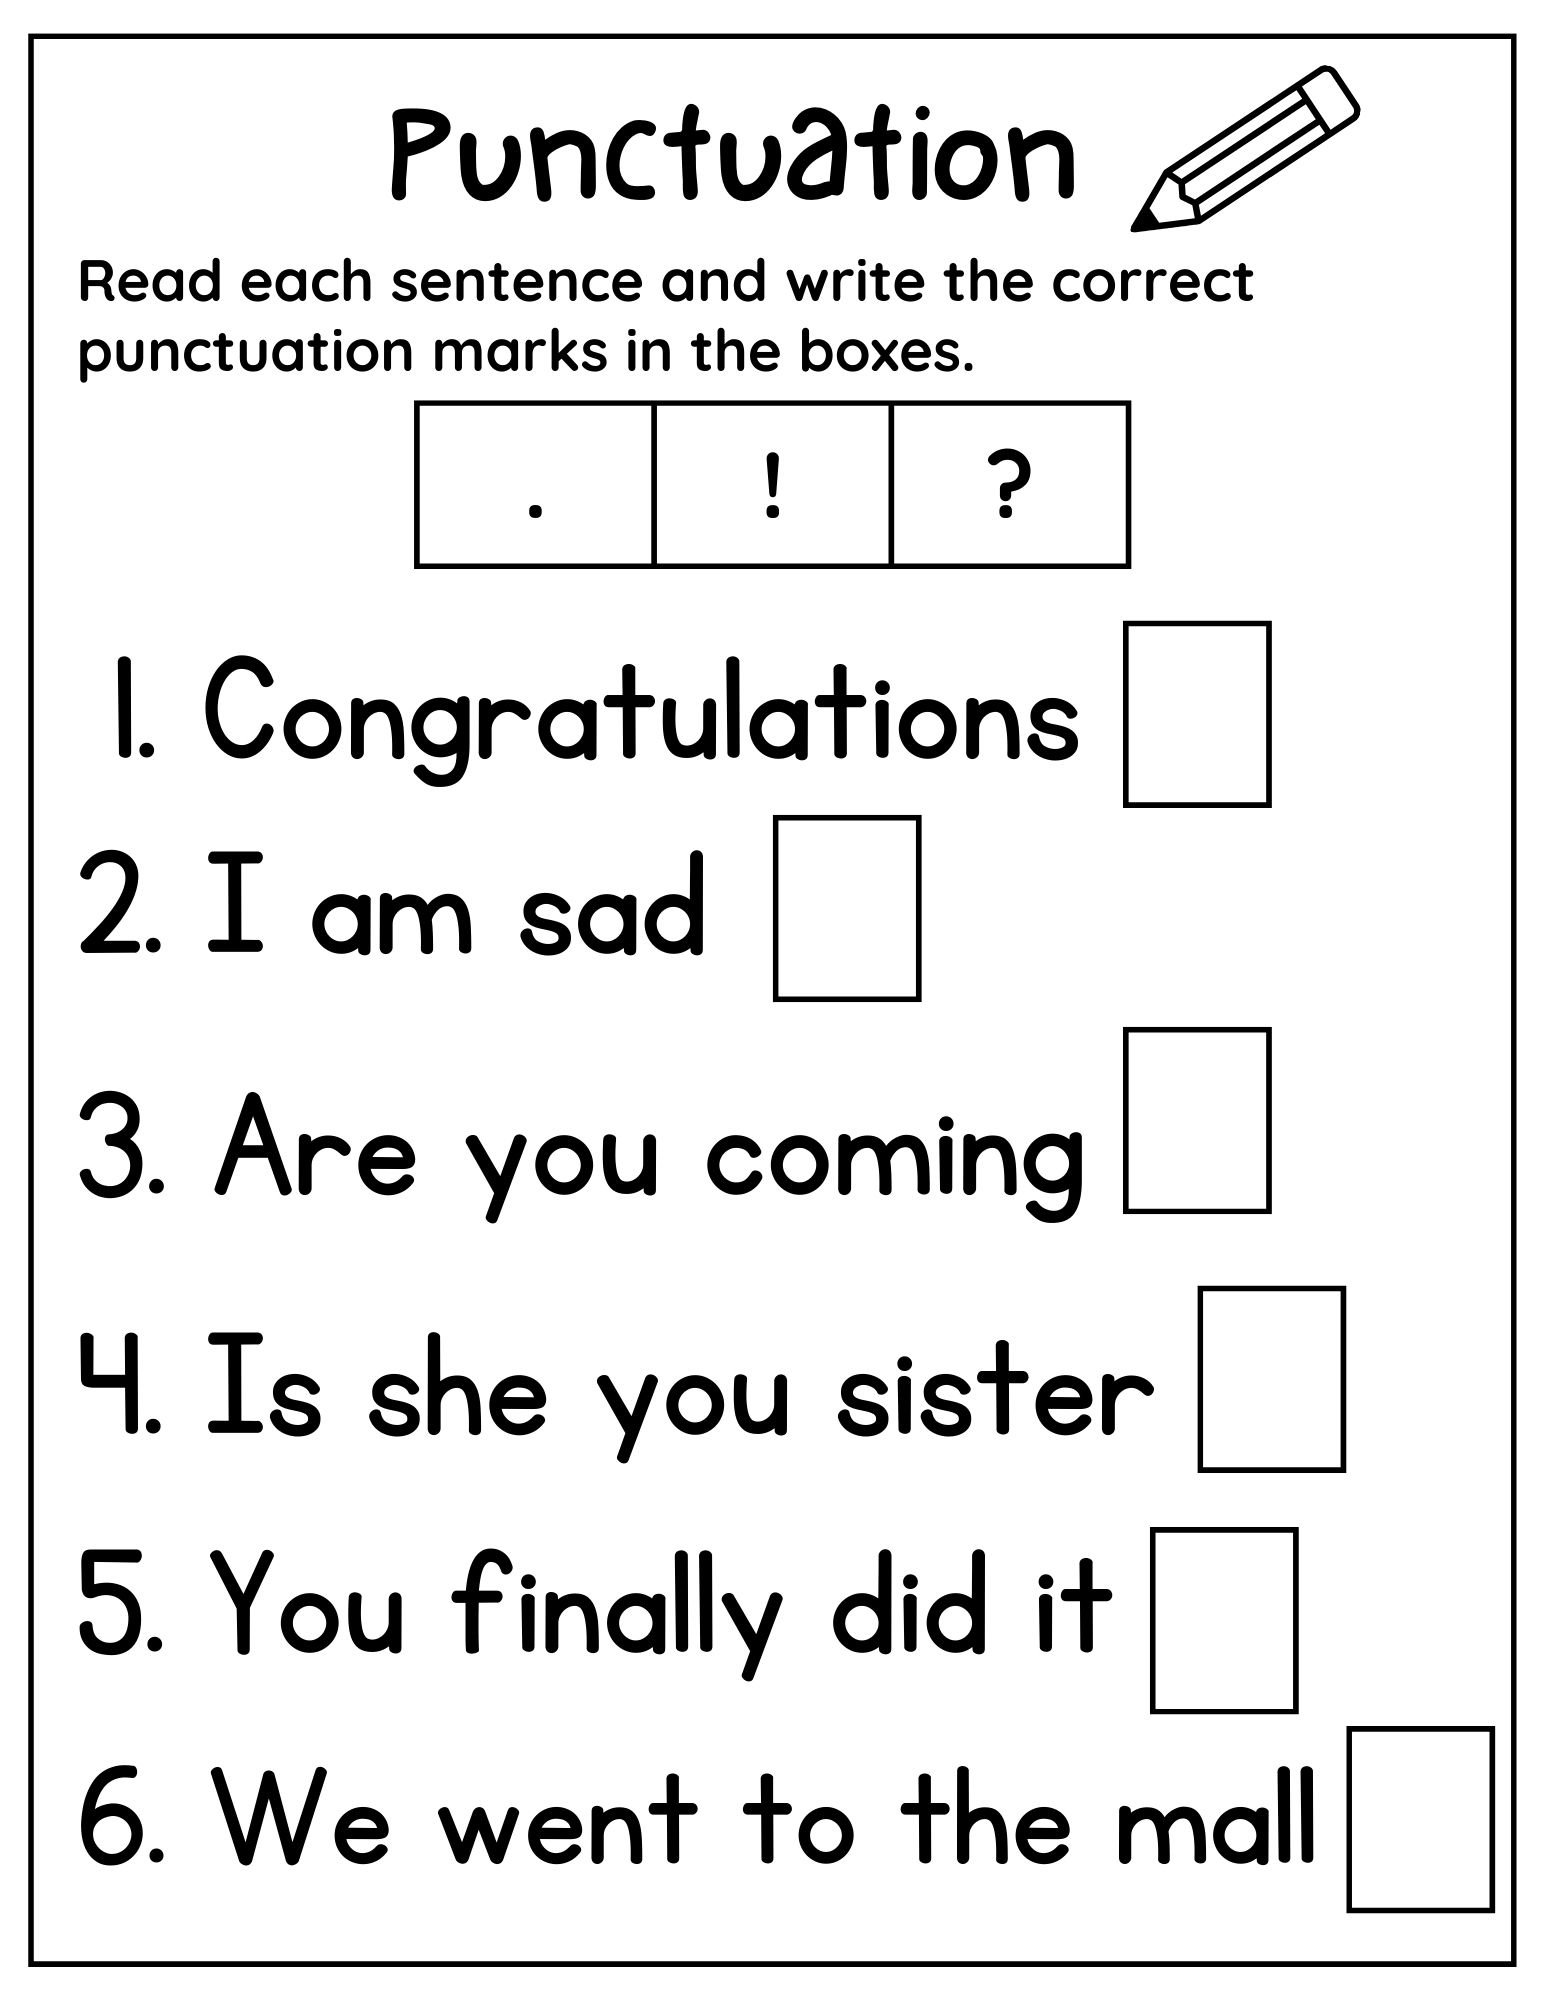 10-printable-punctuation-worksheets-punctuation-practice-worksheets